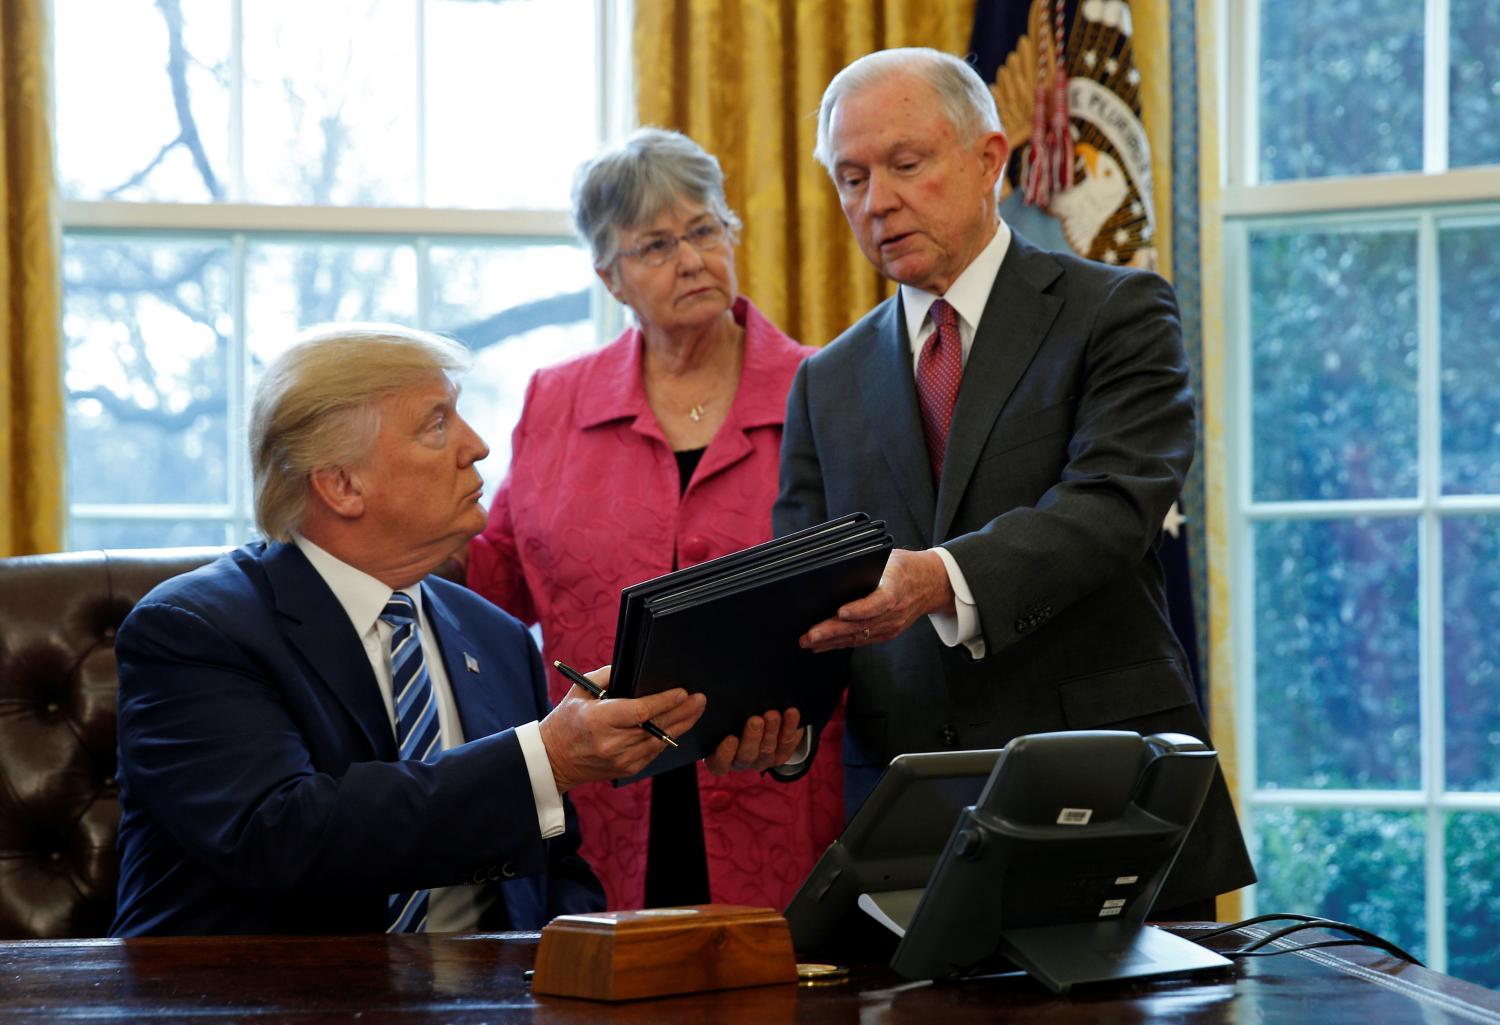 Donald Trump signs an executive order next to Jeff Sessions